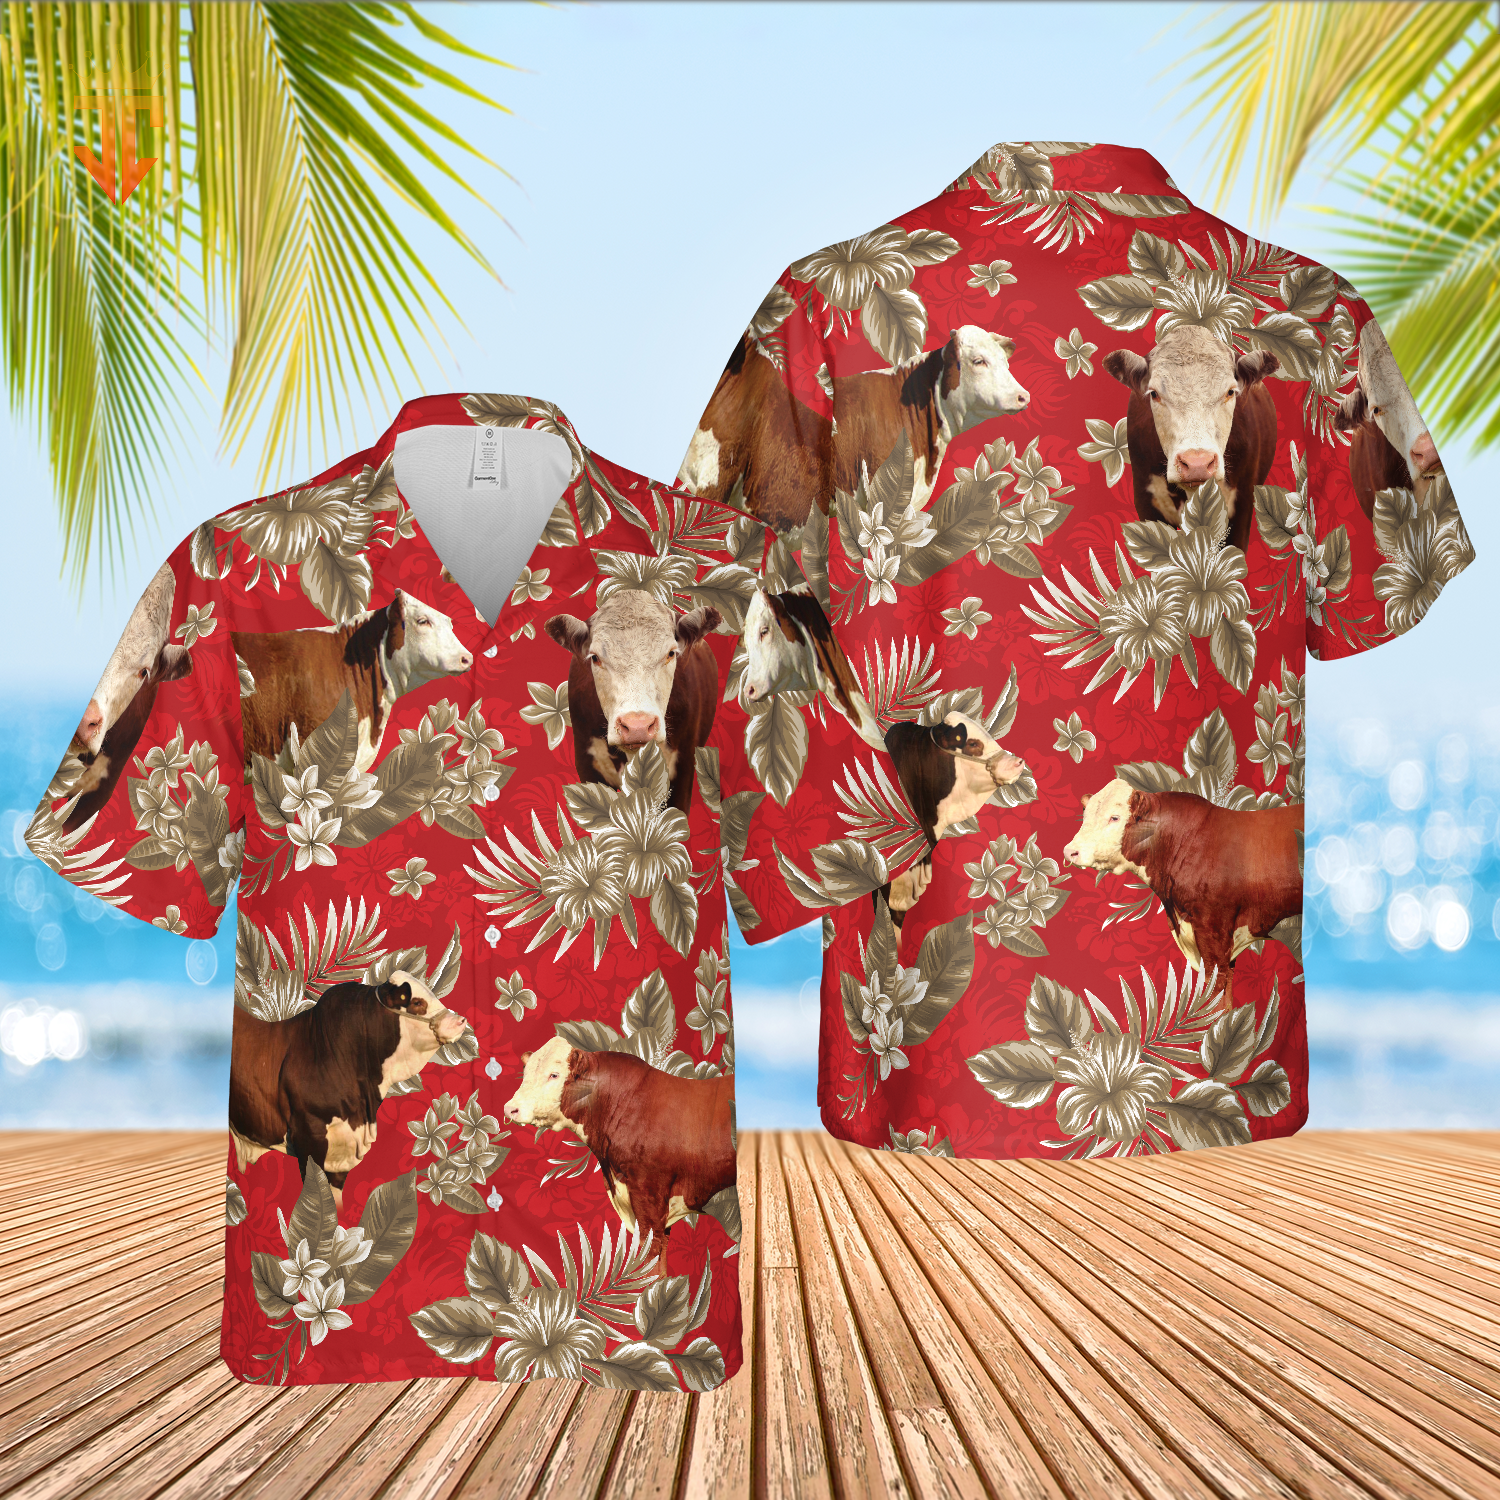 Hereford Cattle Lovers Aloha Pattern All Over Printed 3D Hawaiian Shirt